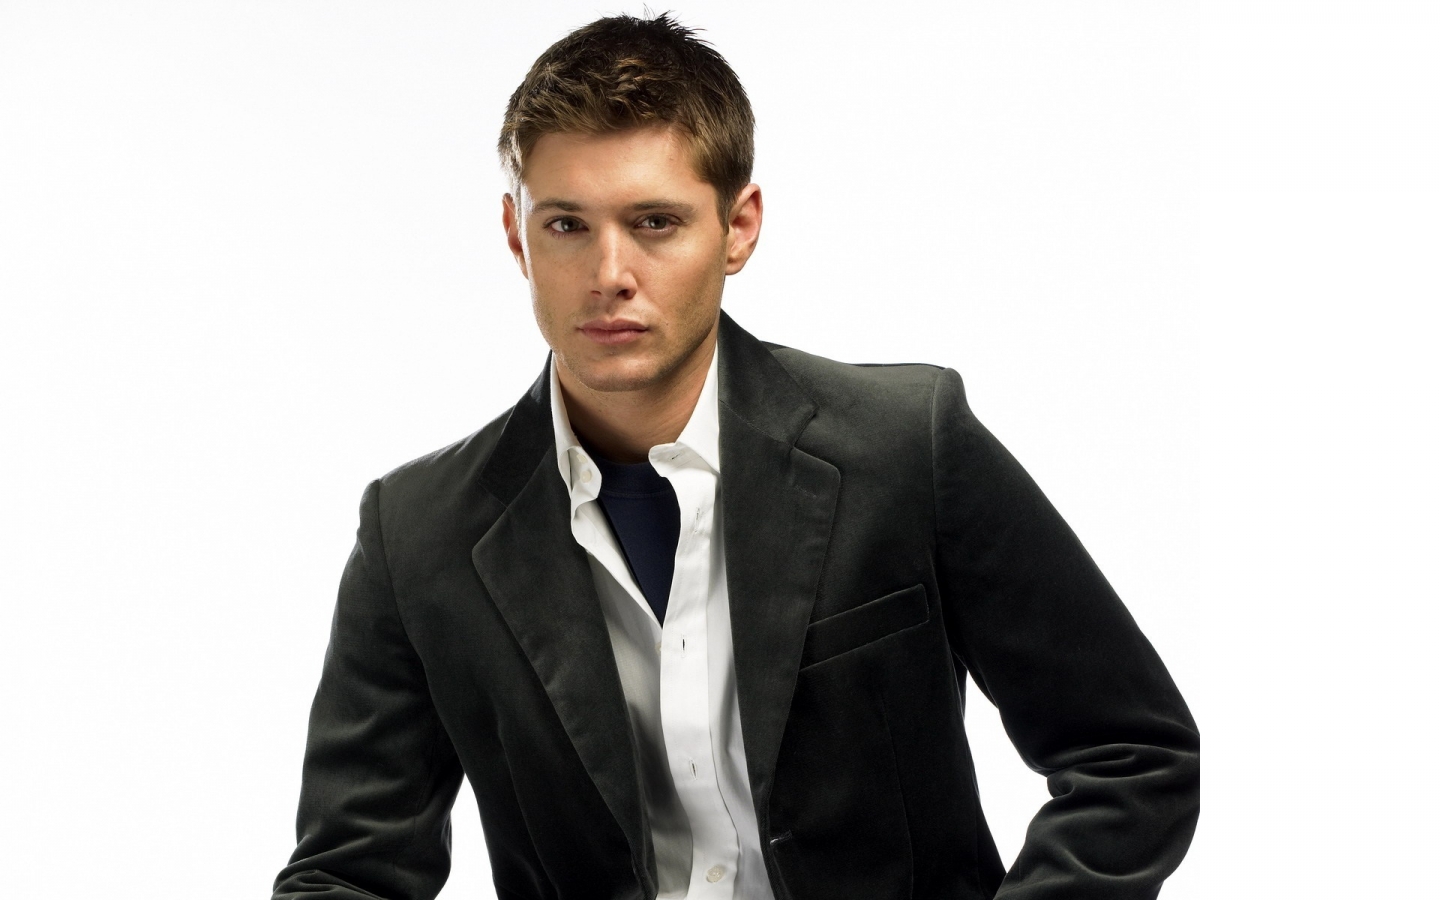 Cool Jensen Ackles for 1440 x 900 widescreen resolution